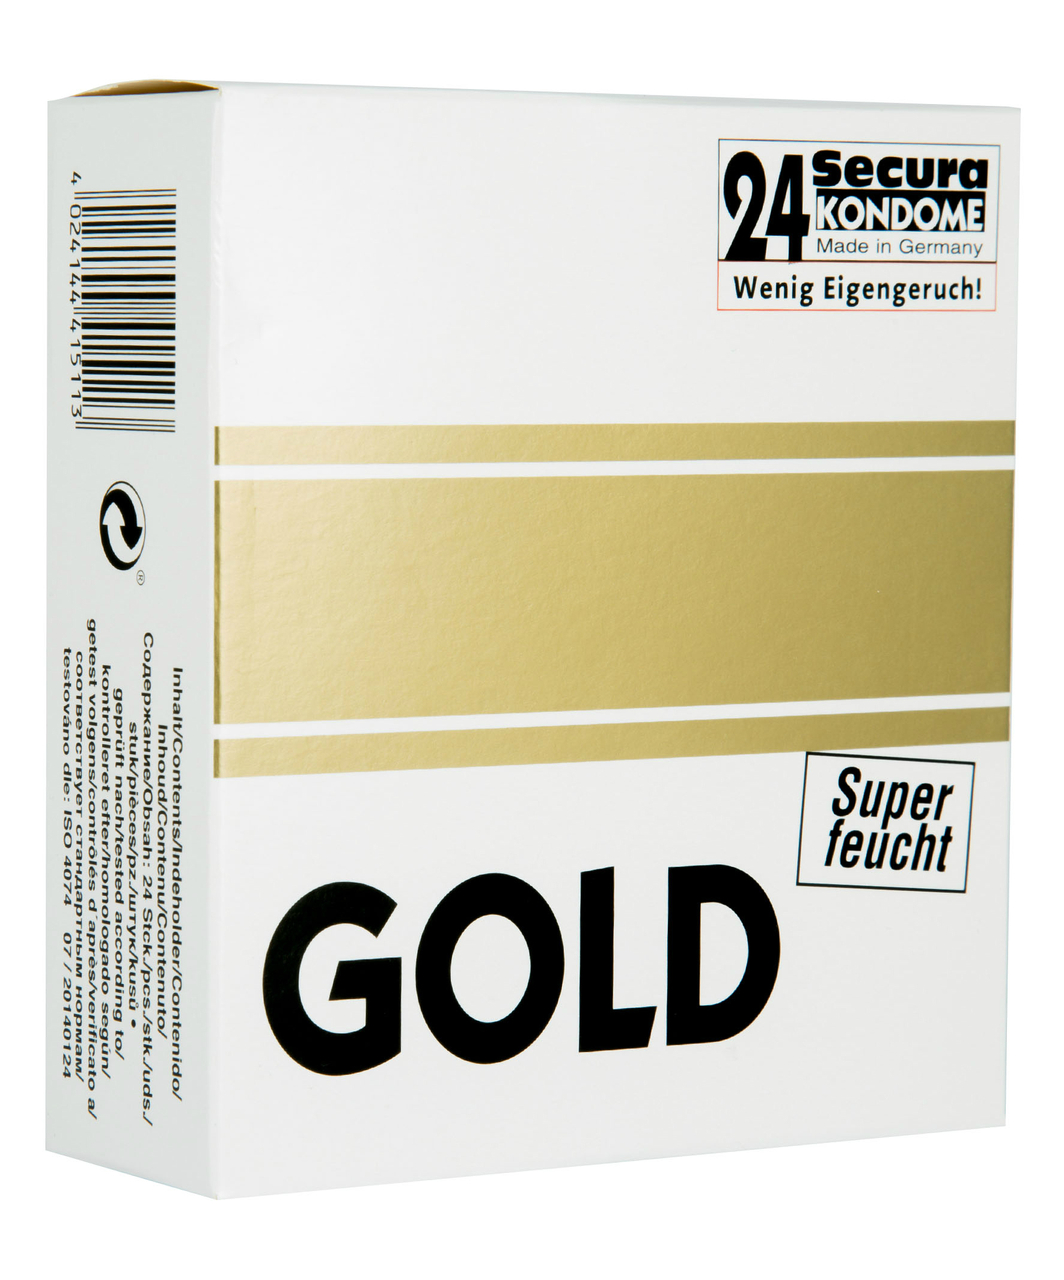 Secura Gold Extra Lubricated (24 pcs)